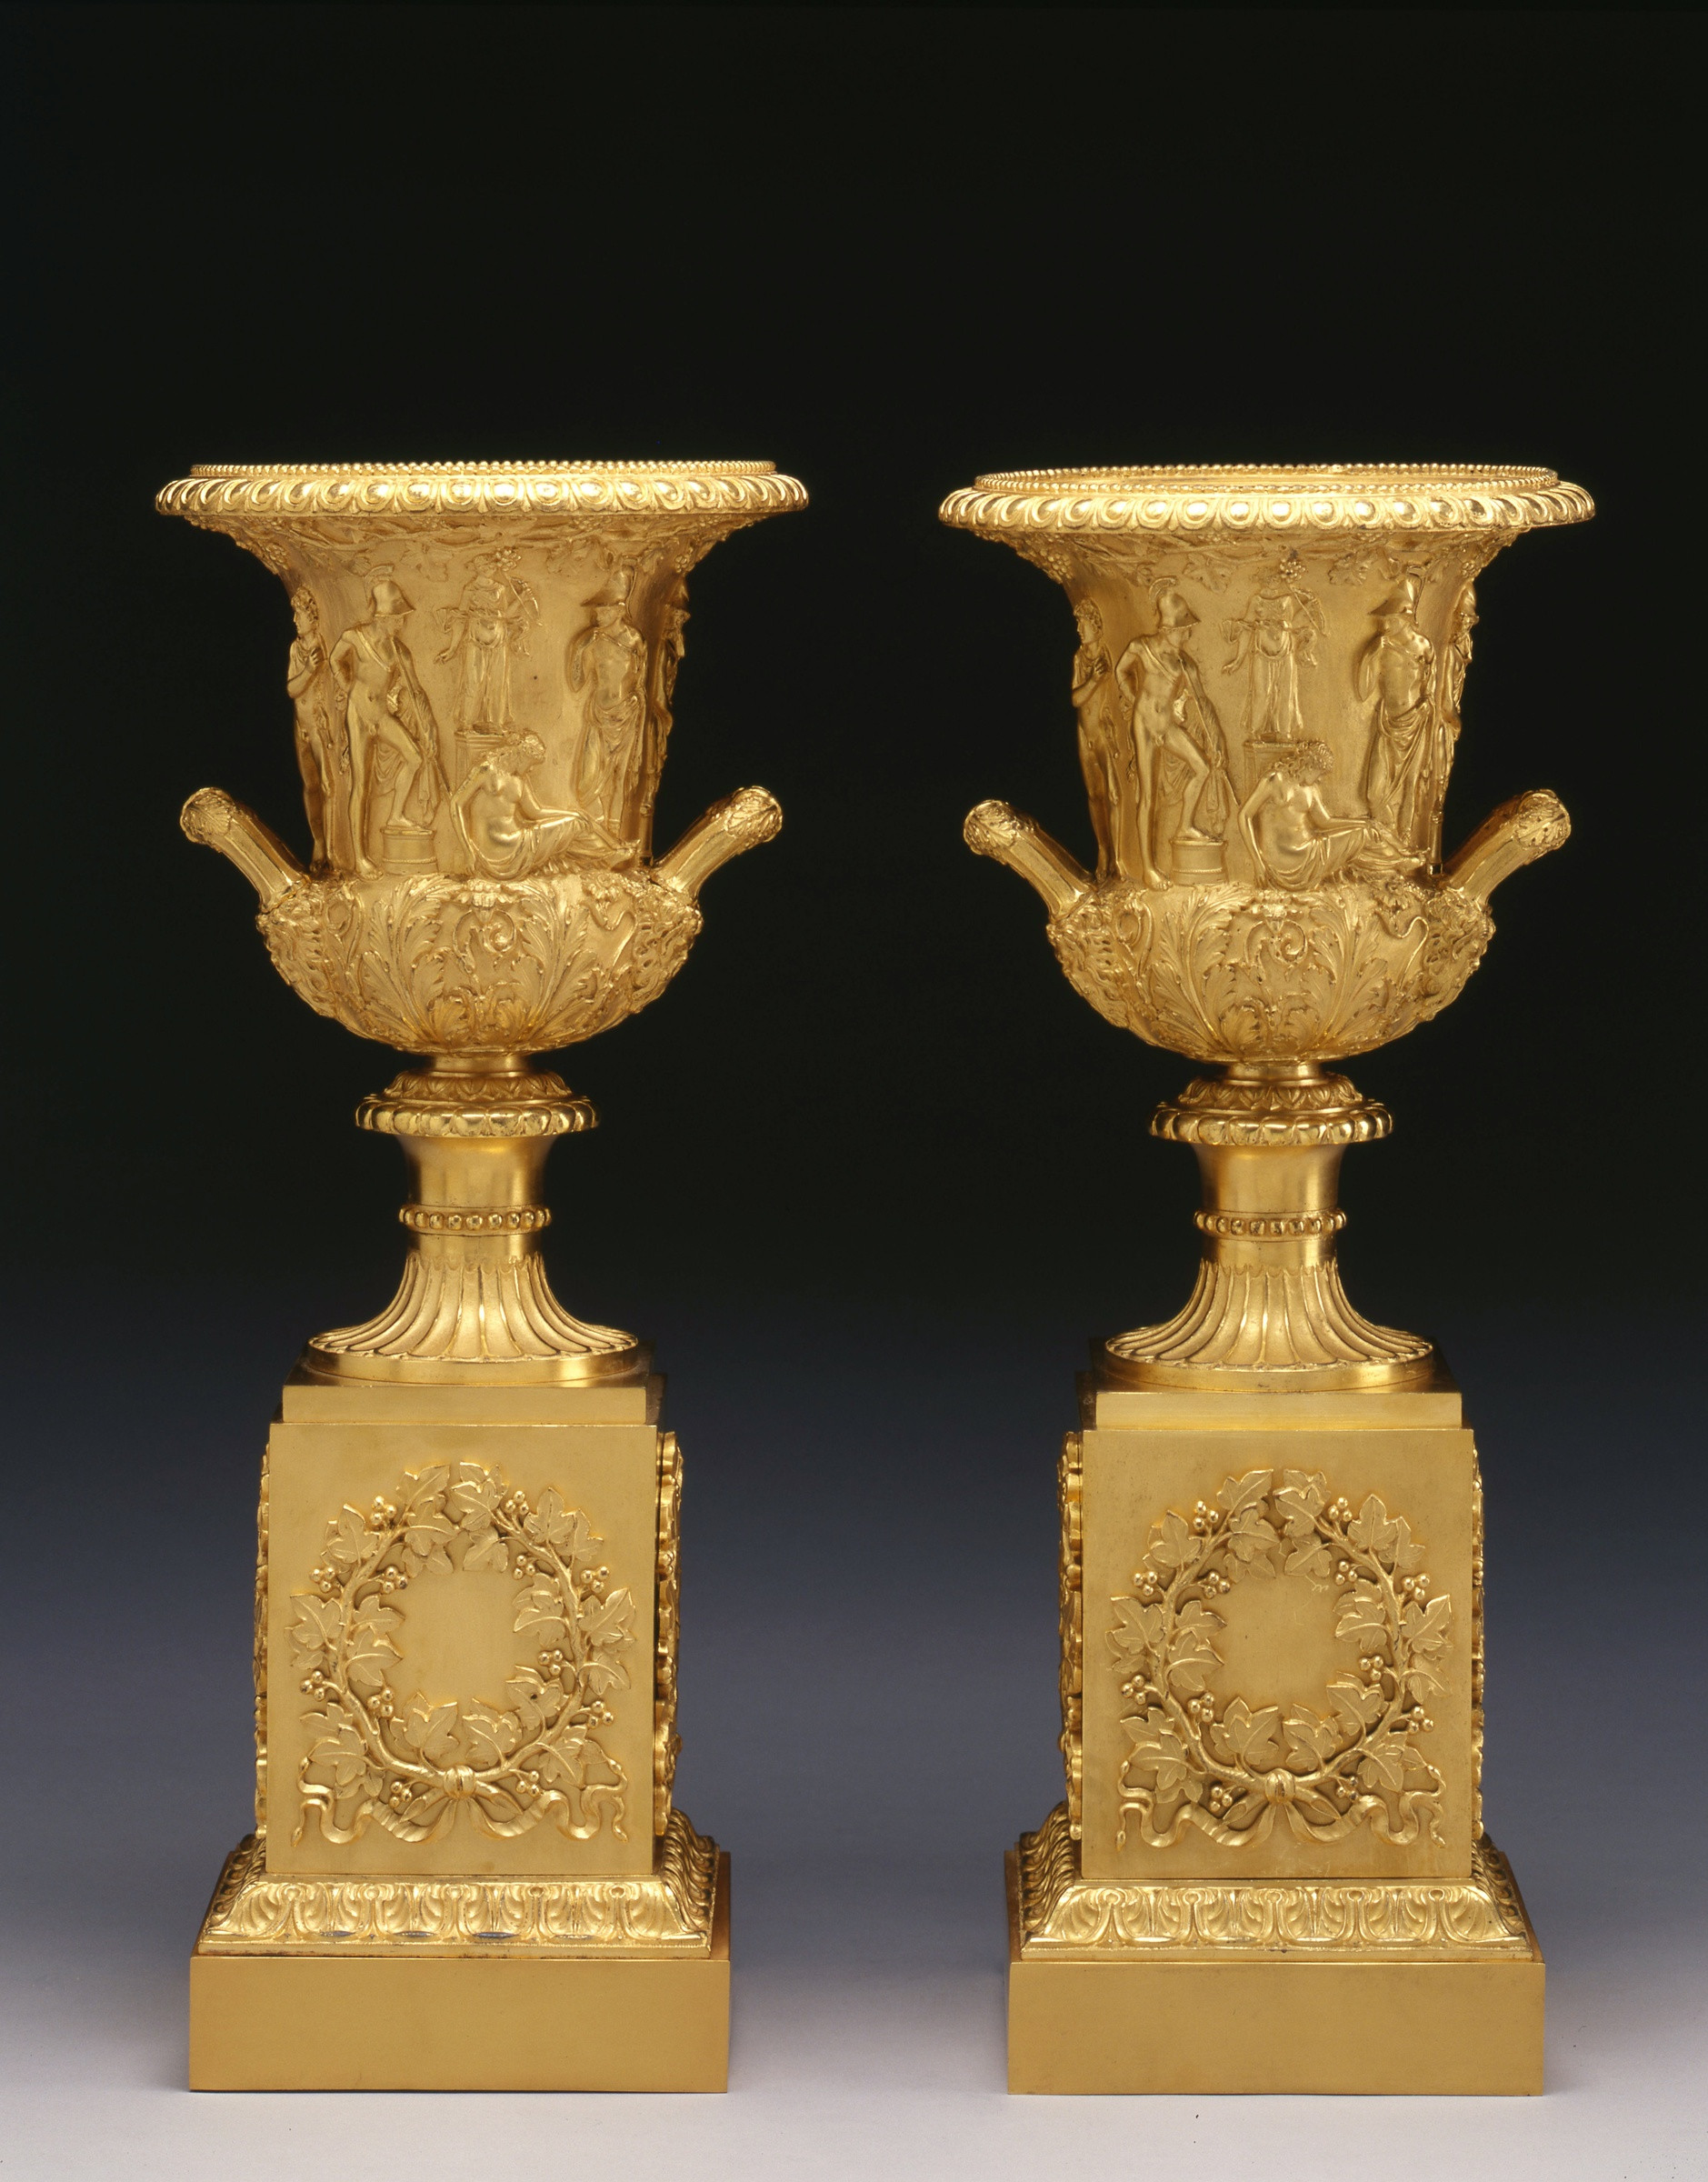 29 Spectacular Tall Fluted Vases 2024 free download tall fluted vases of pierre philippe thomire attributed to a pair of empire medici with a pair of empire medici vases on pedestals attributed to pierre philippe thomire